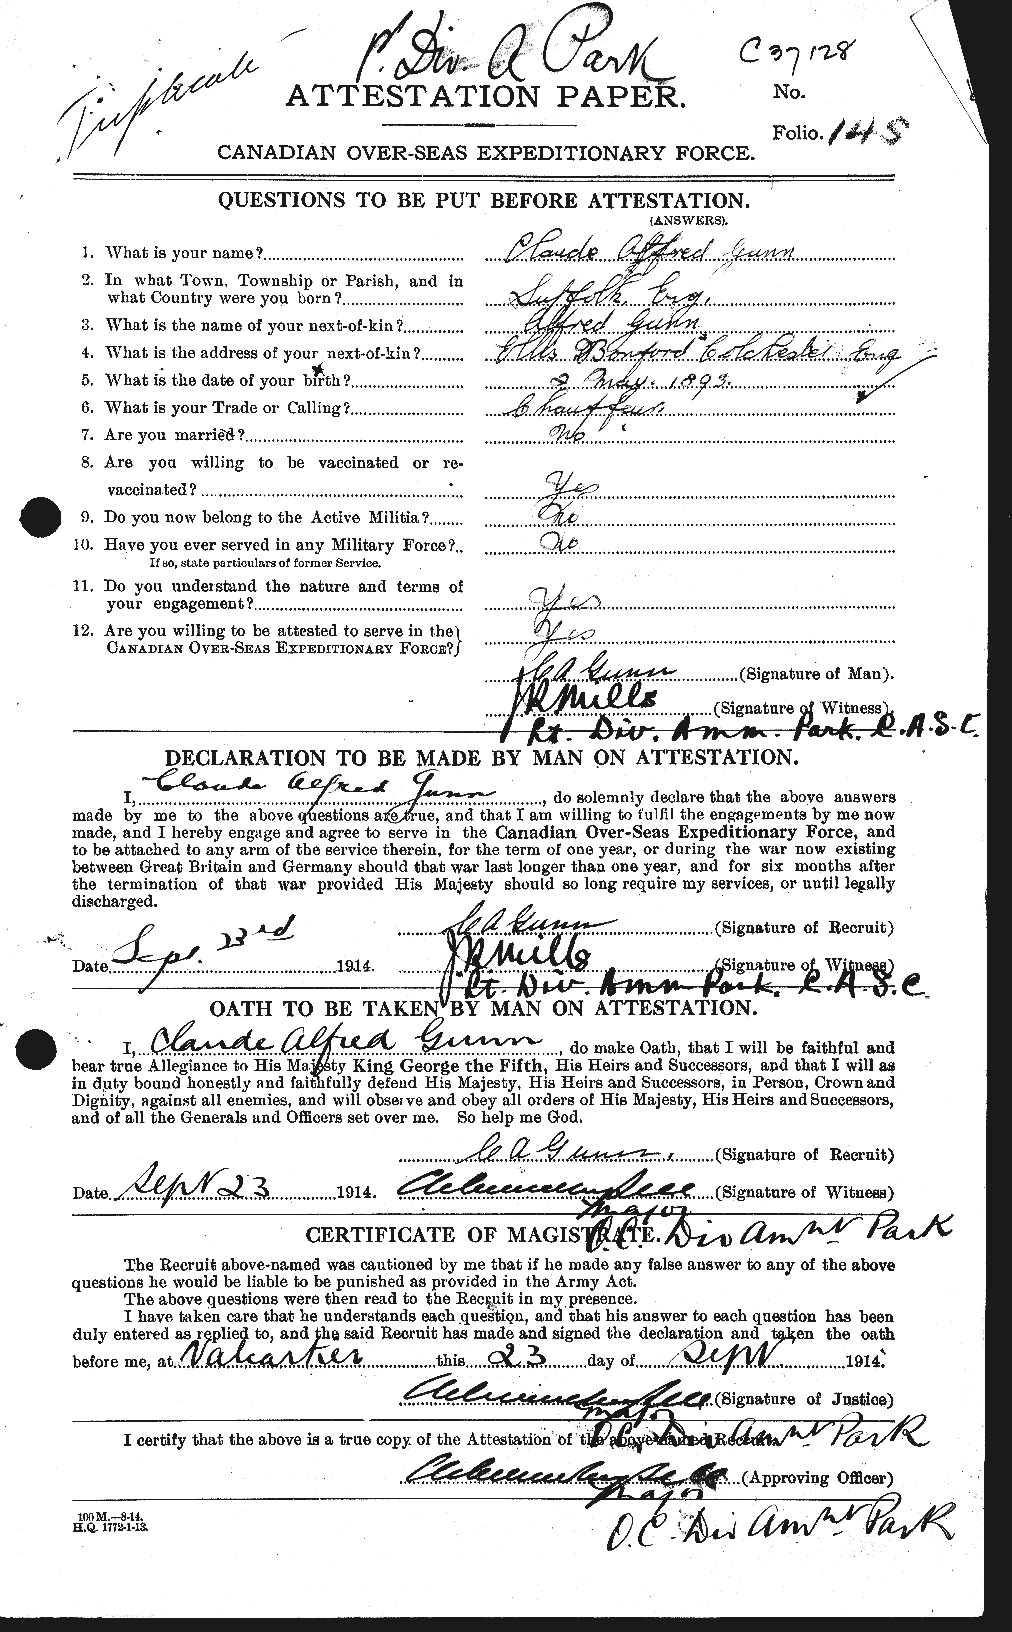 Personnel Records of the First World War - CEF 368010a